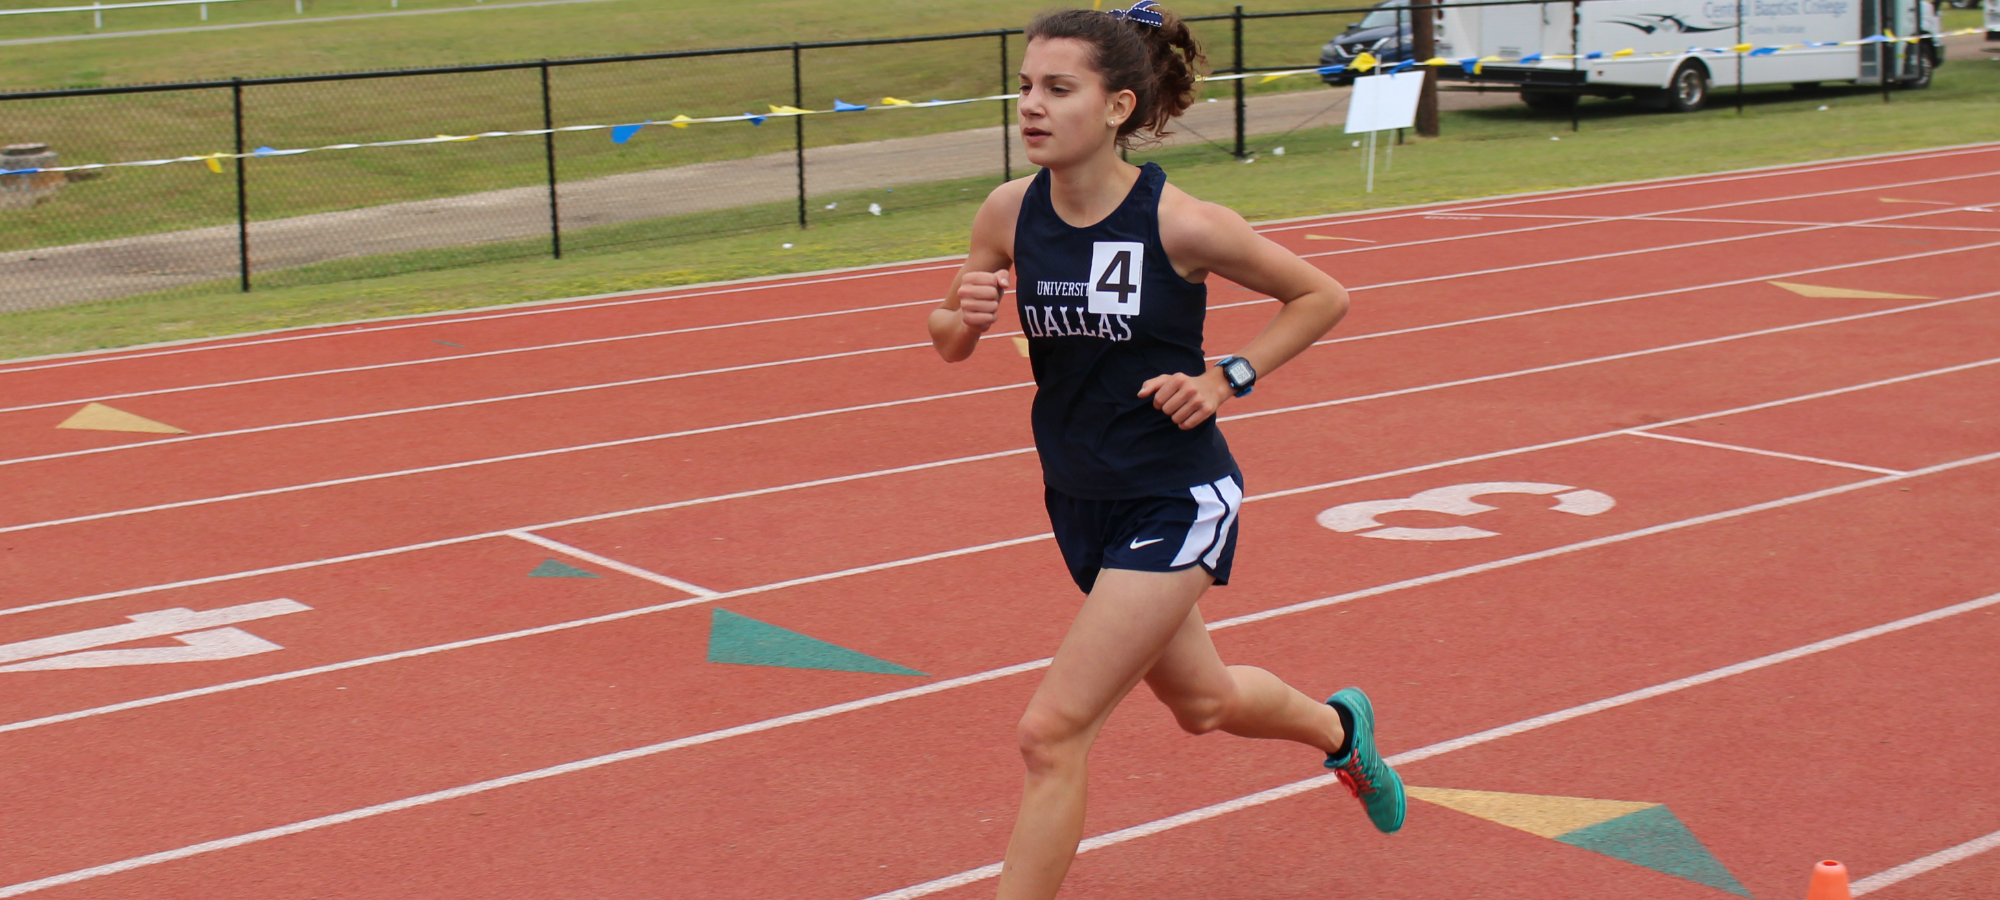 Wilgenbusch Sets New School Record in Women's 5000-meter race at East Texas Invitational